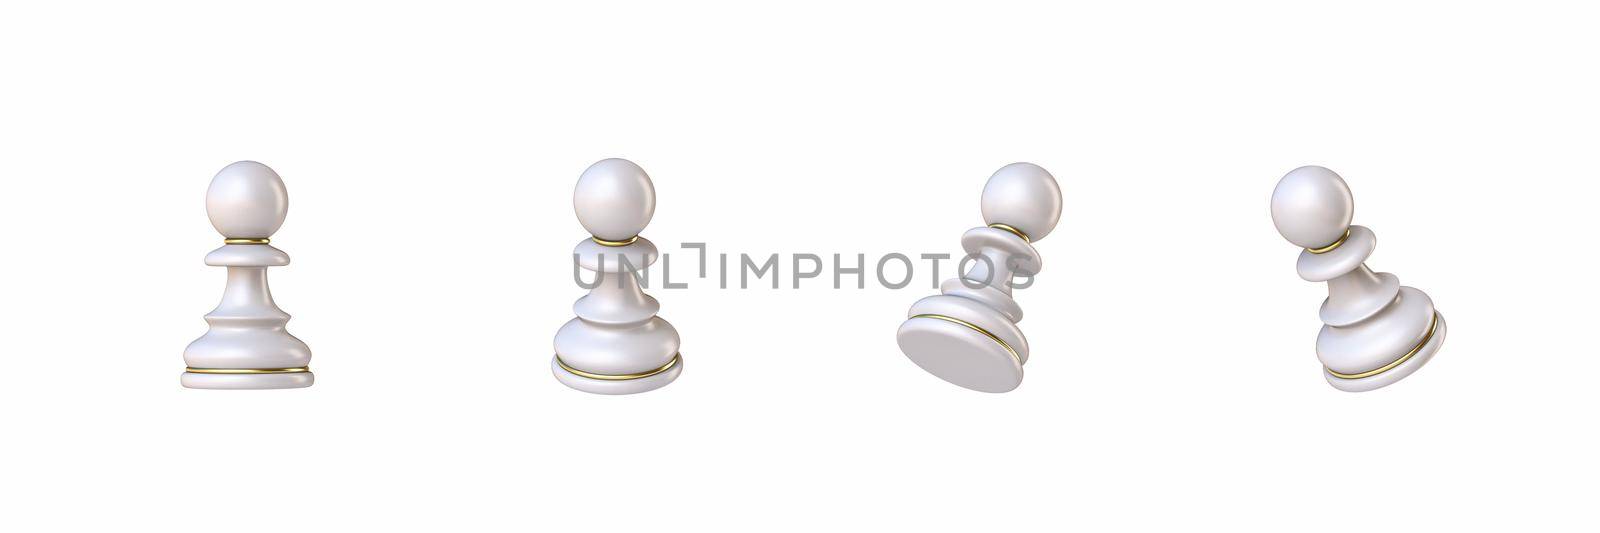 White chess Pawn in four different angled views 3D rendering illustration isolated on white background